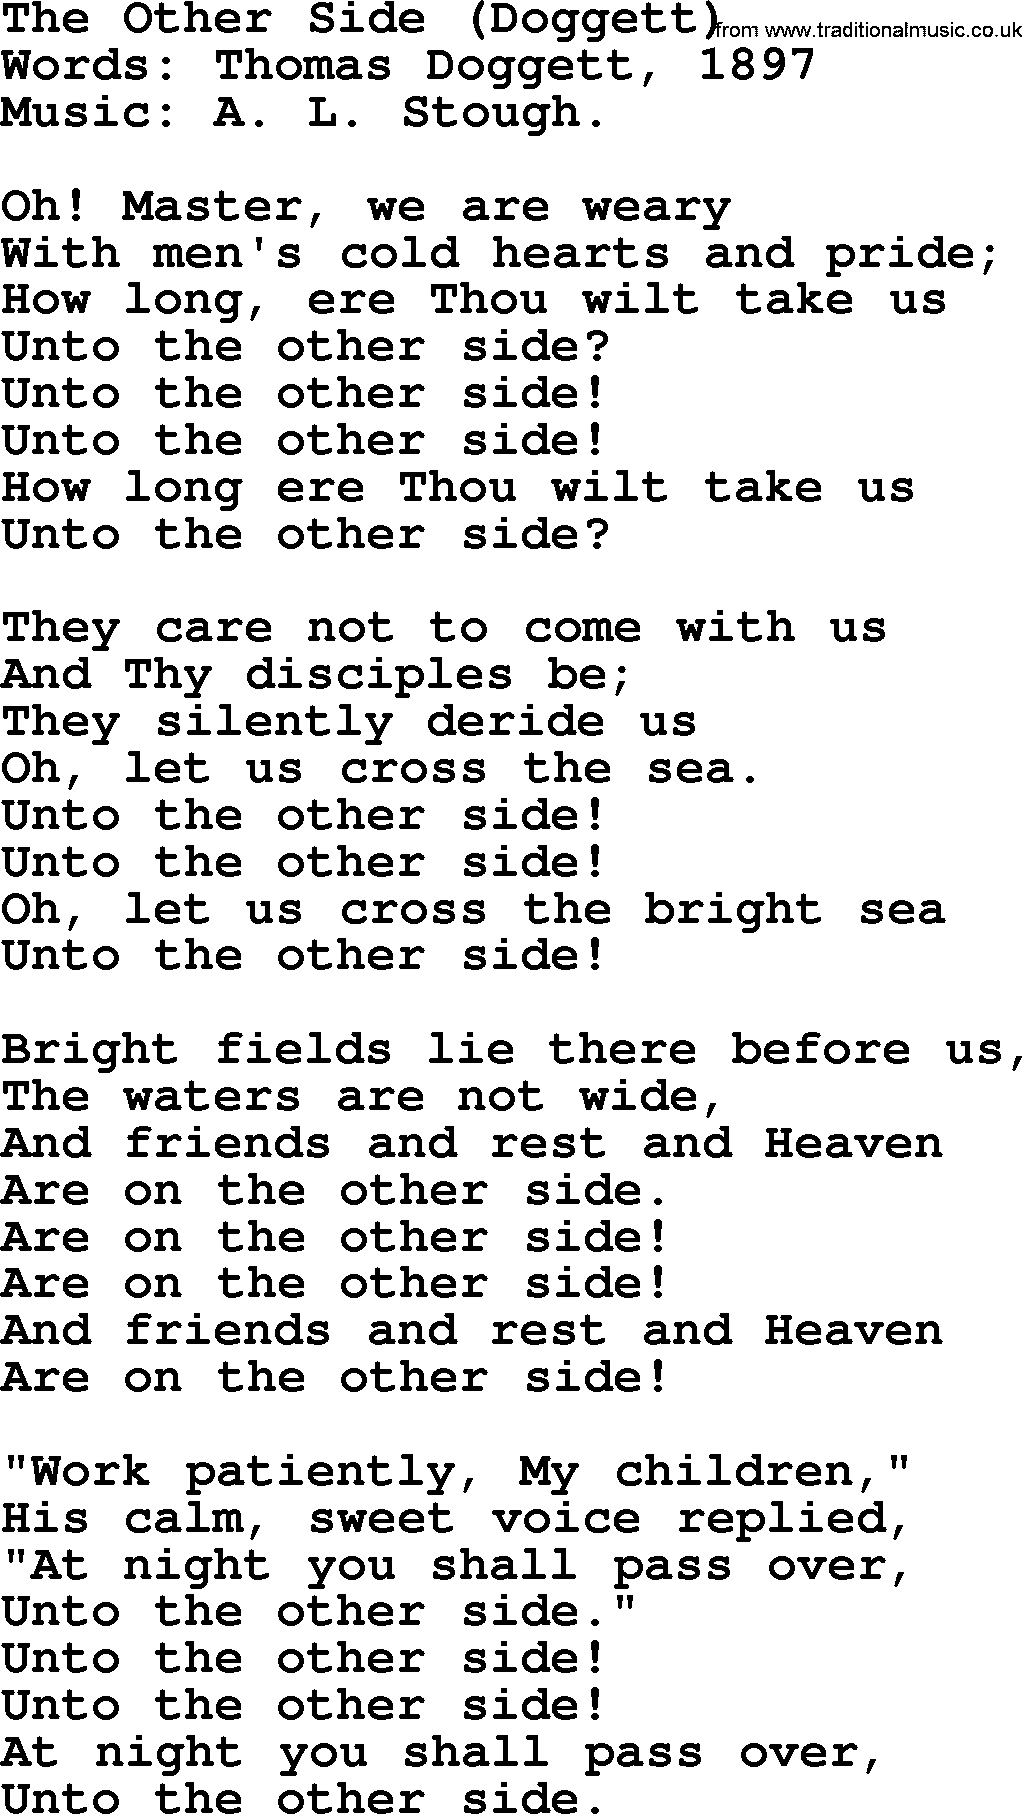 Songs and Hymns about Heaven: The Other Side (doggett) lyrics with PDF